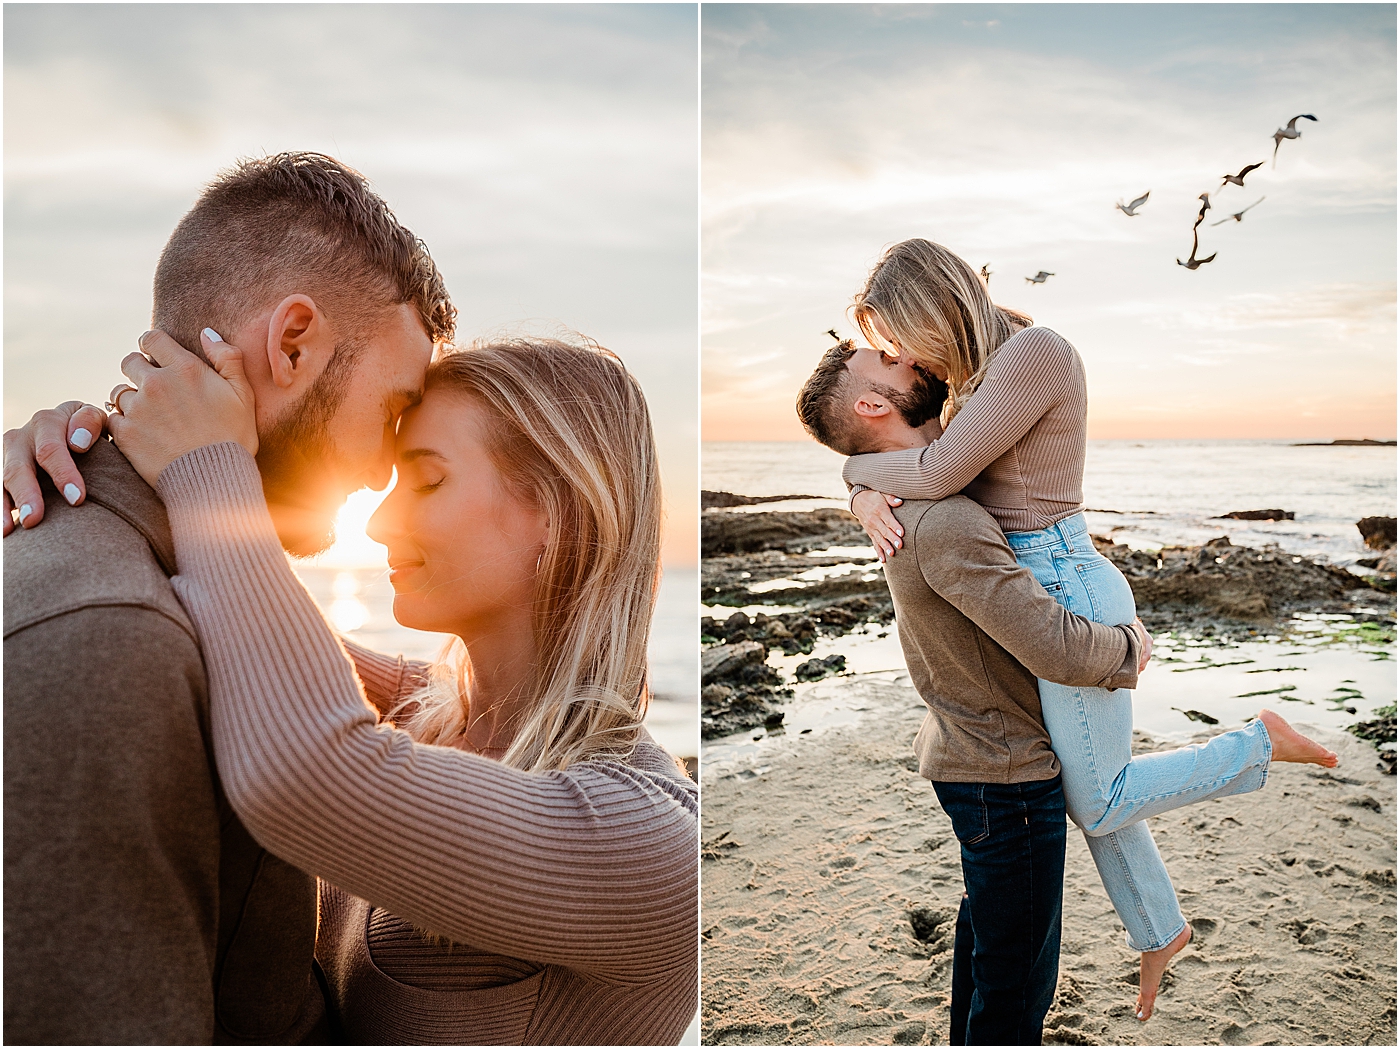 Laguna beach photography at Treasure Island Park. Couple kissing during the sunset. Guy holding girl up for a kiss.